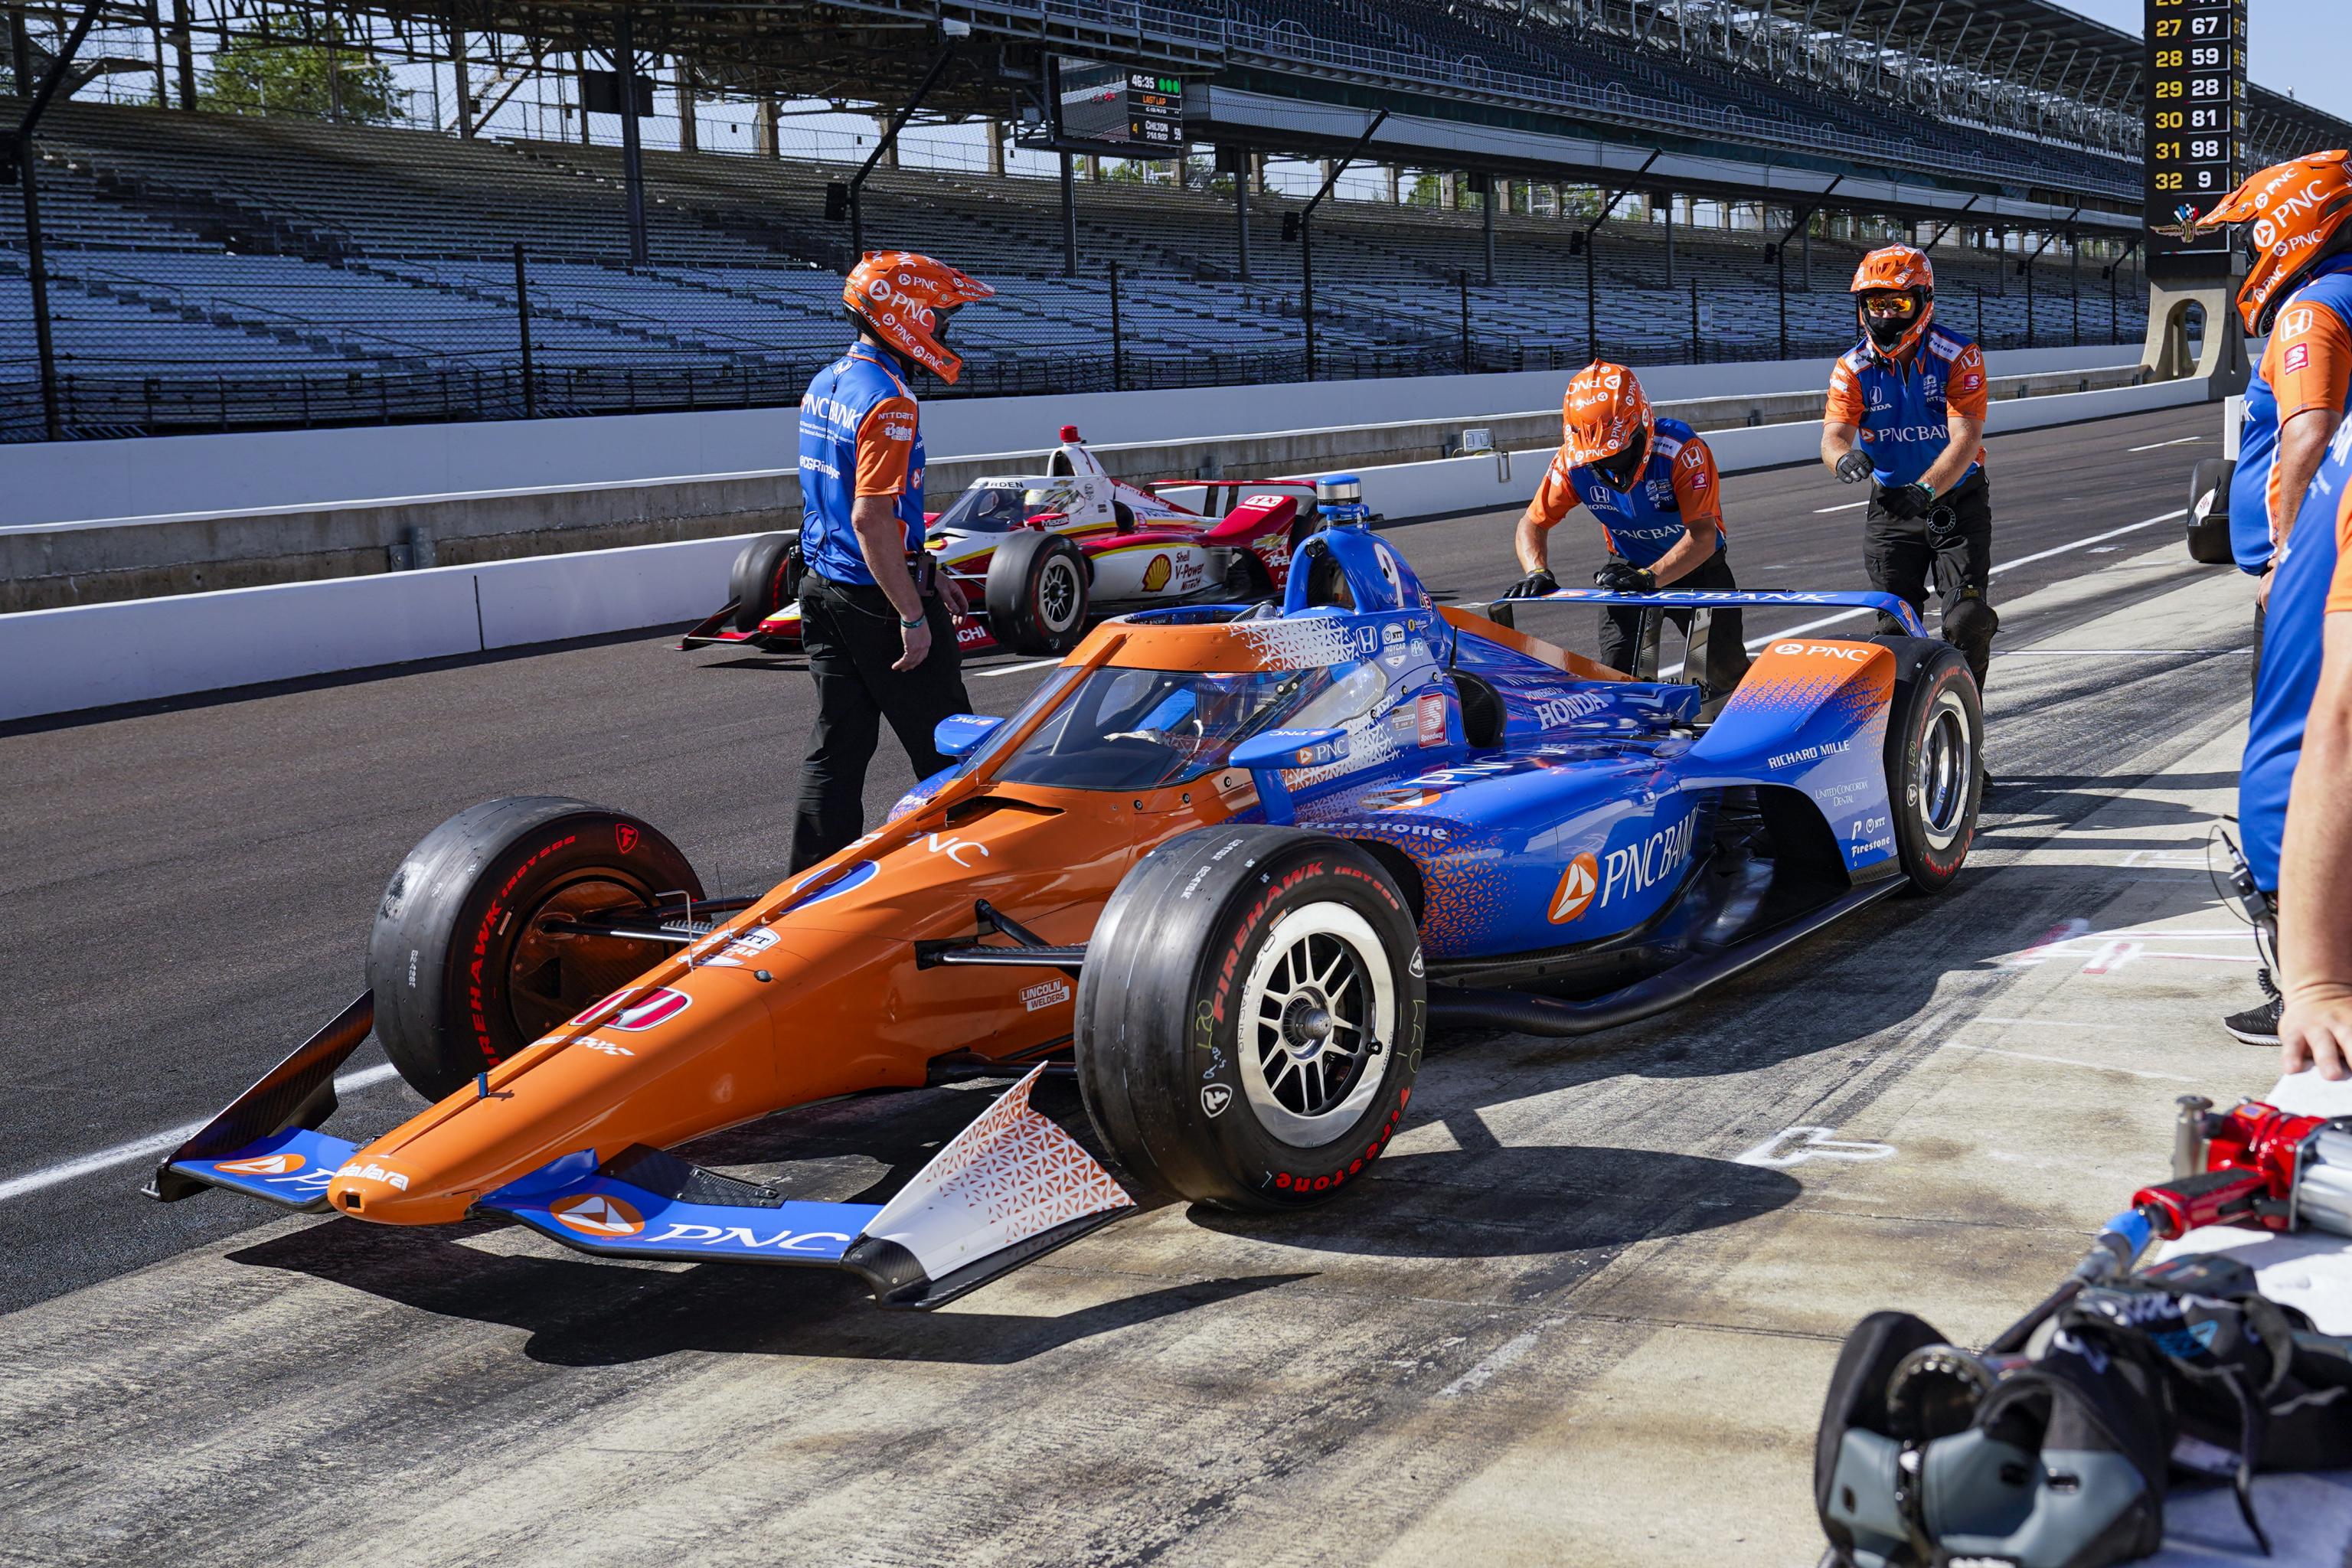 Indy 500 Lineup 2020 Full Starting Grid and Predictions for Top Drivers